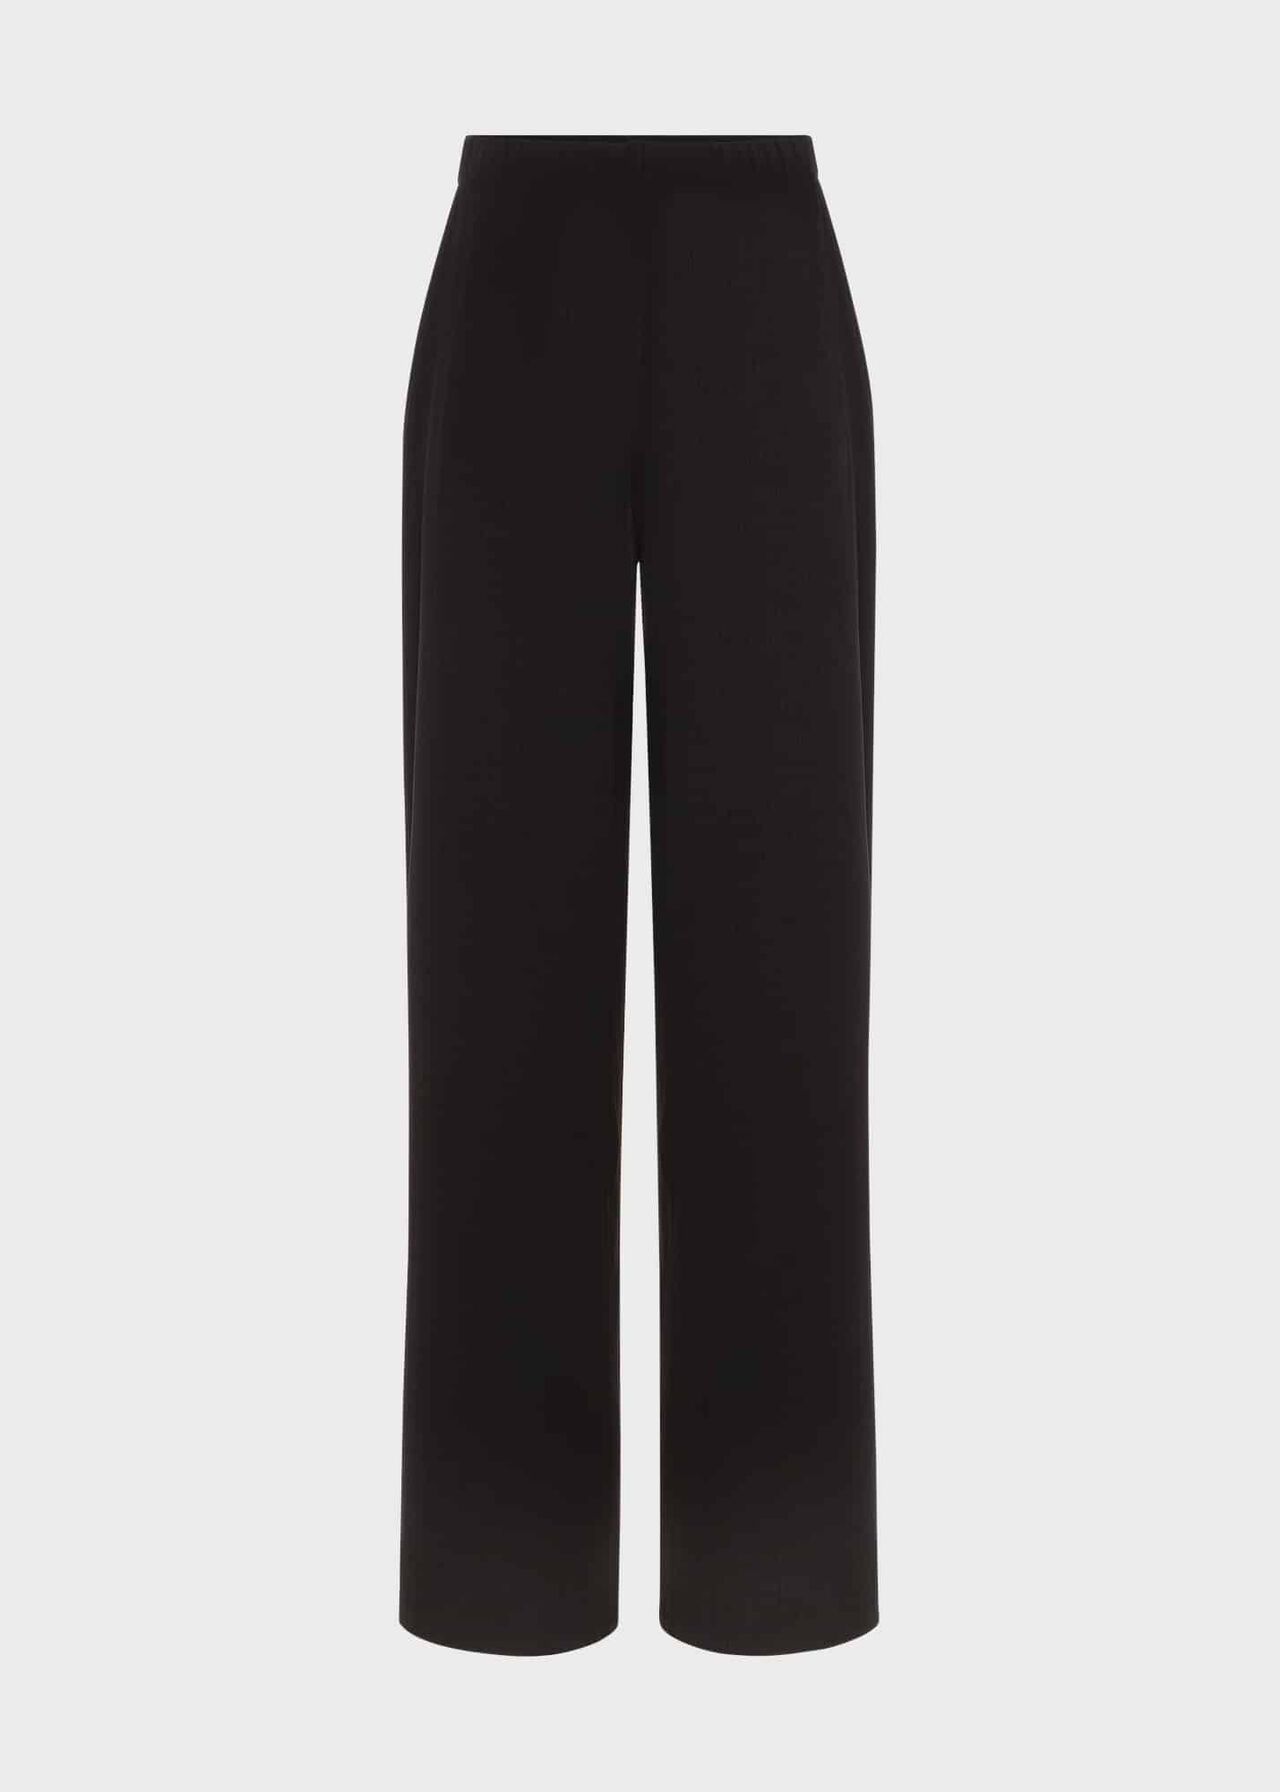 Avery Jersey Trousers, Black, hi-res